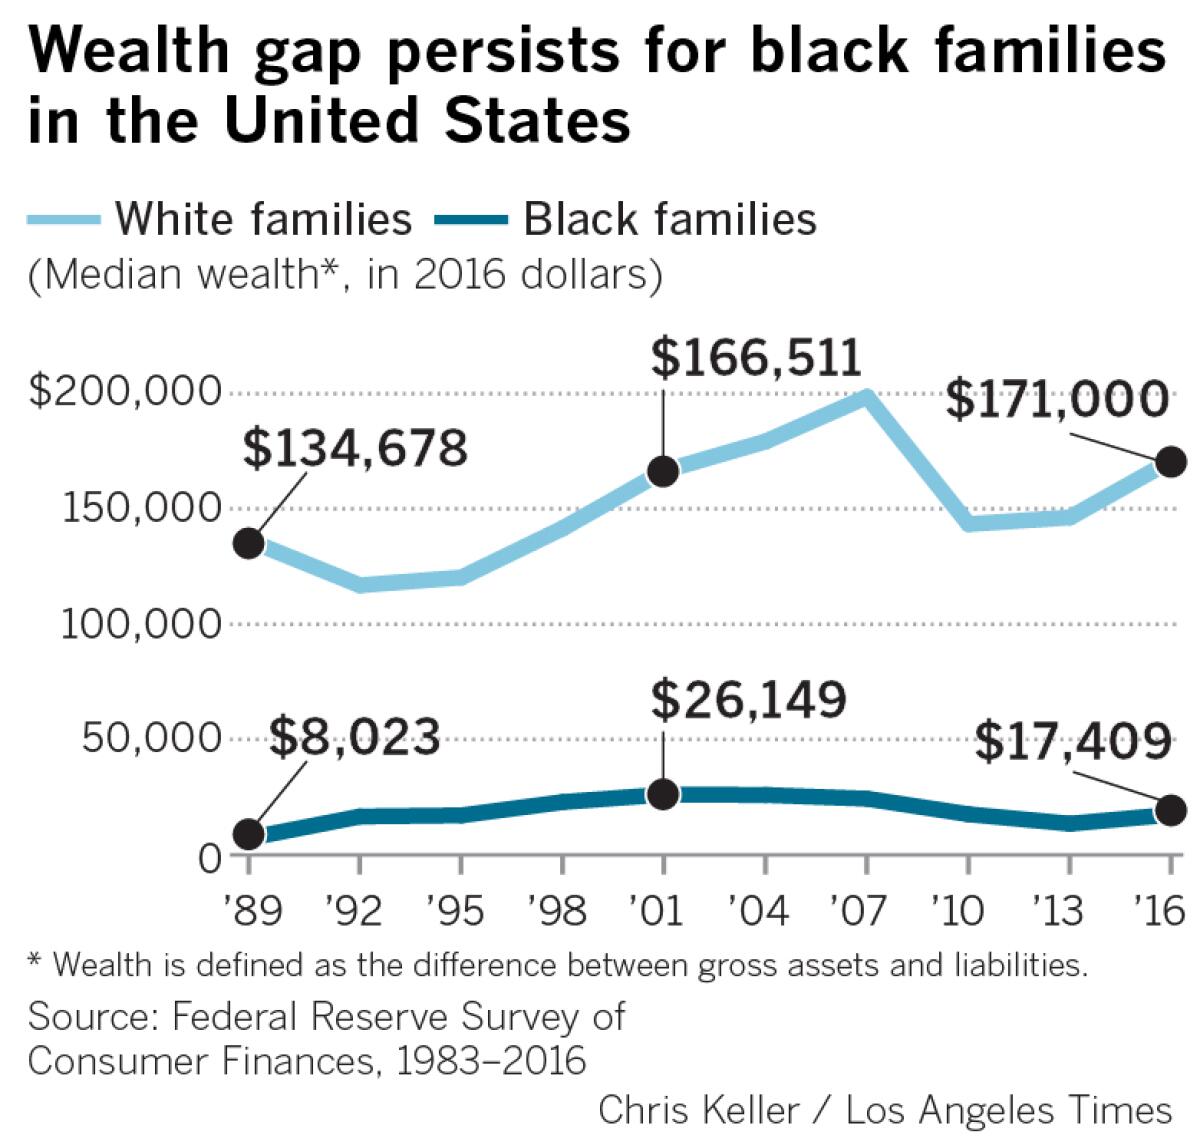 Chart shows median wealth of white families versus Black families from 1989 through 2016